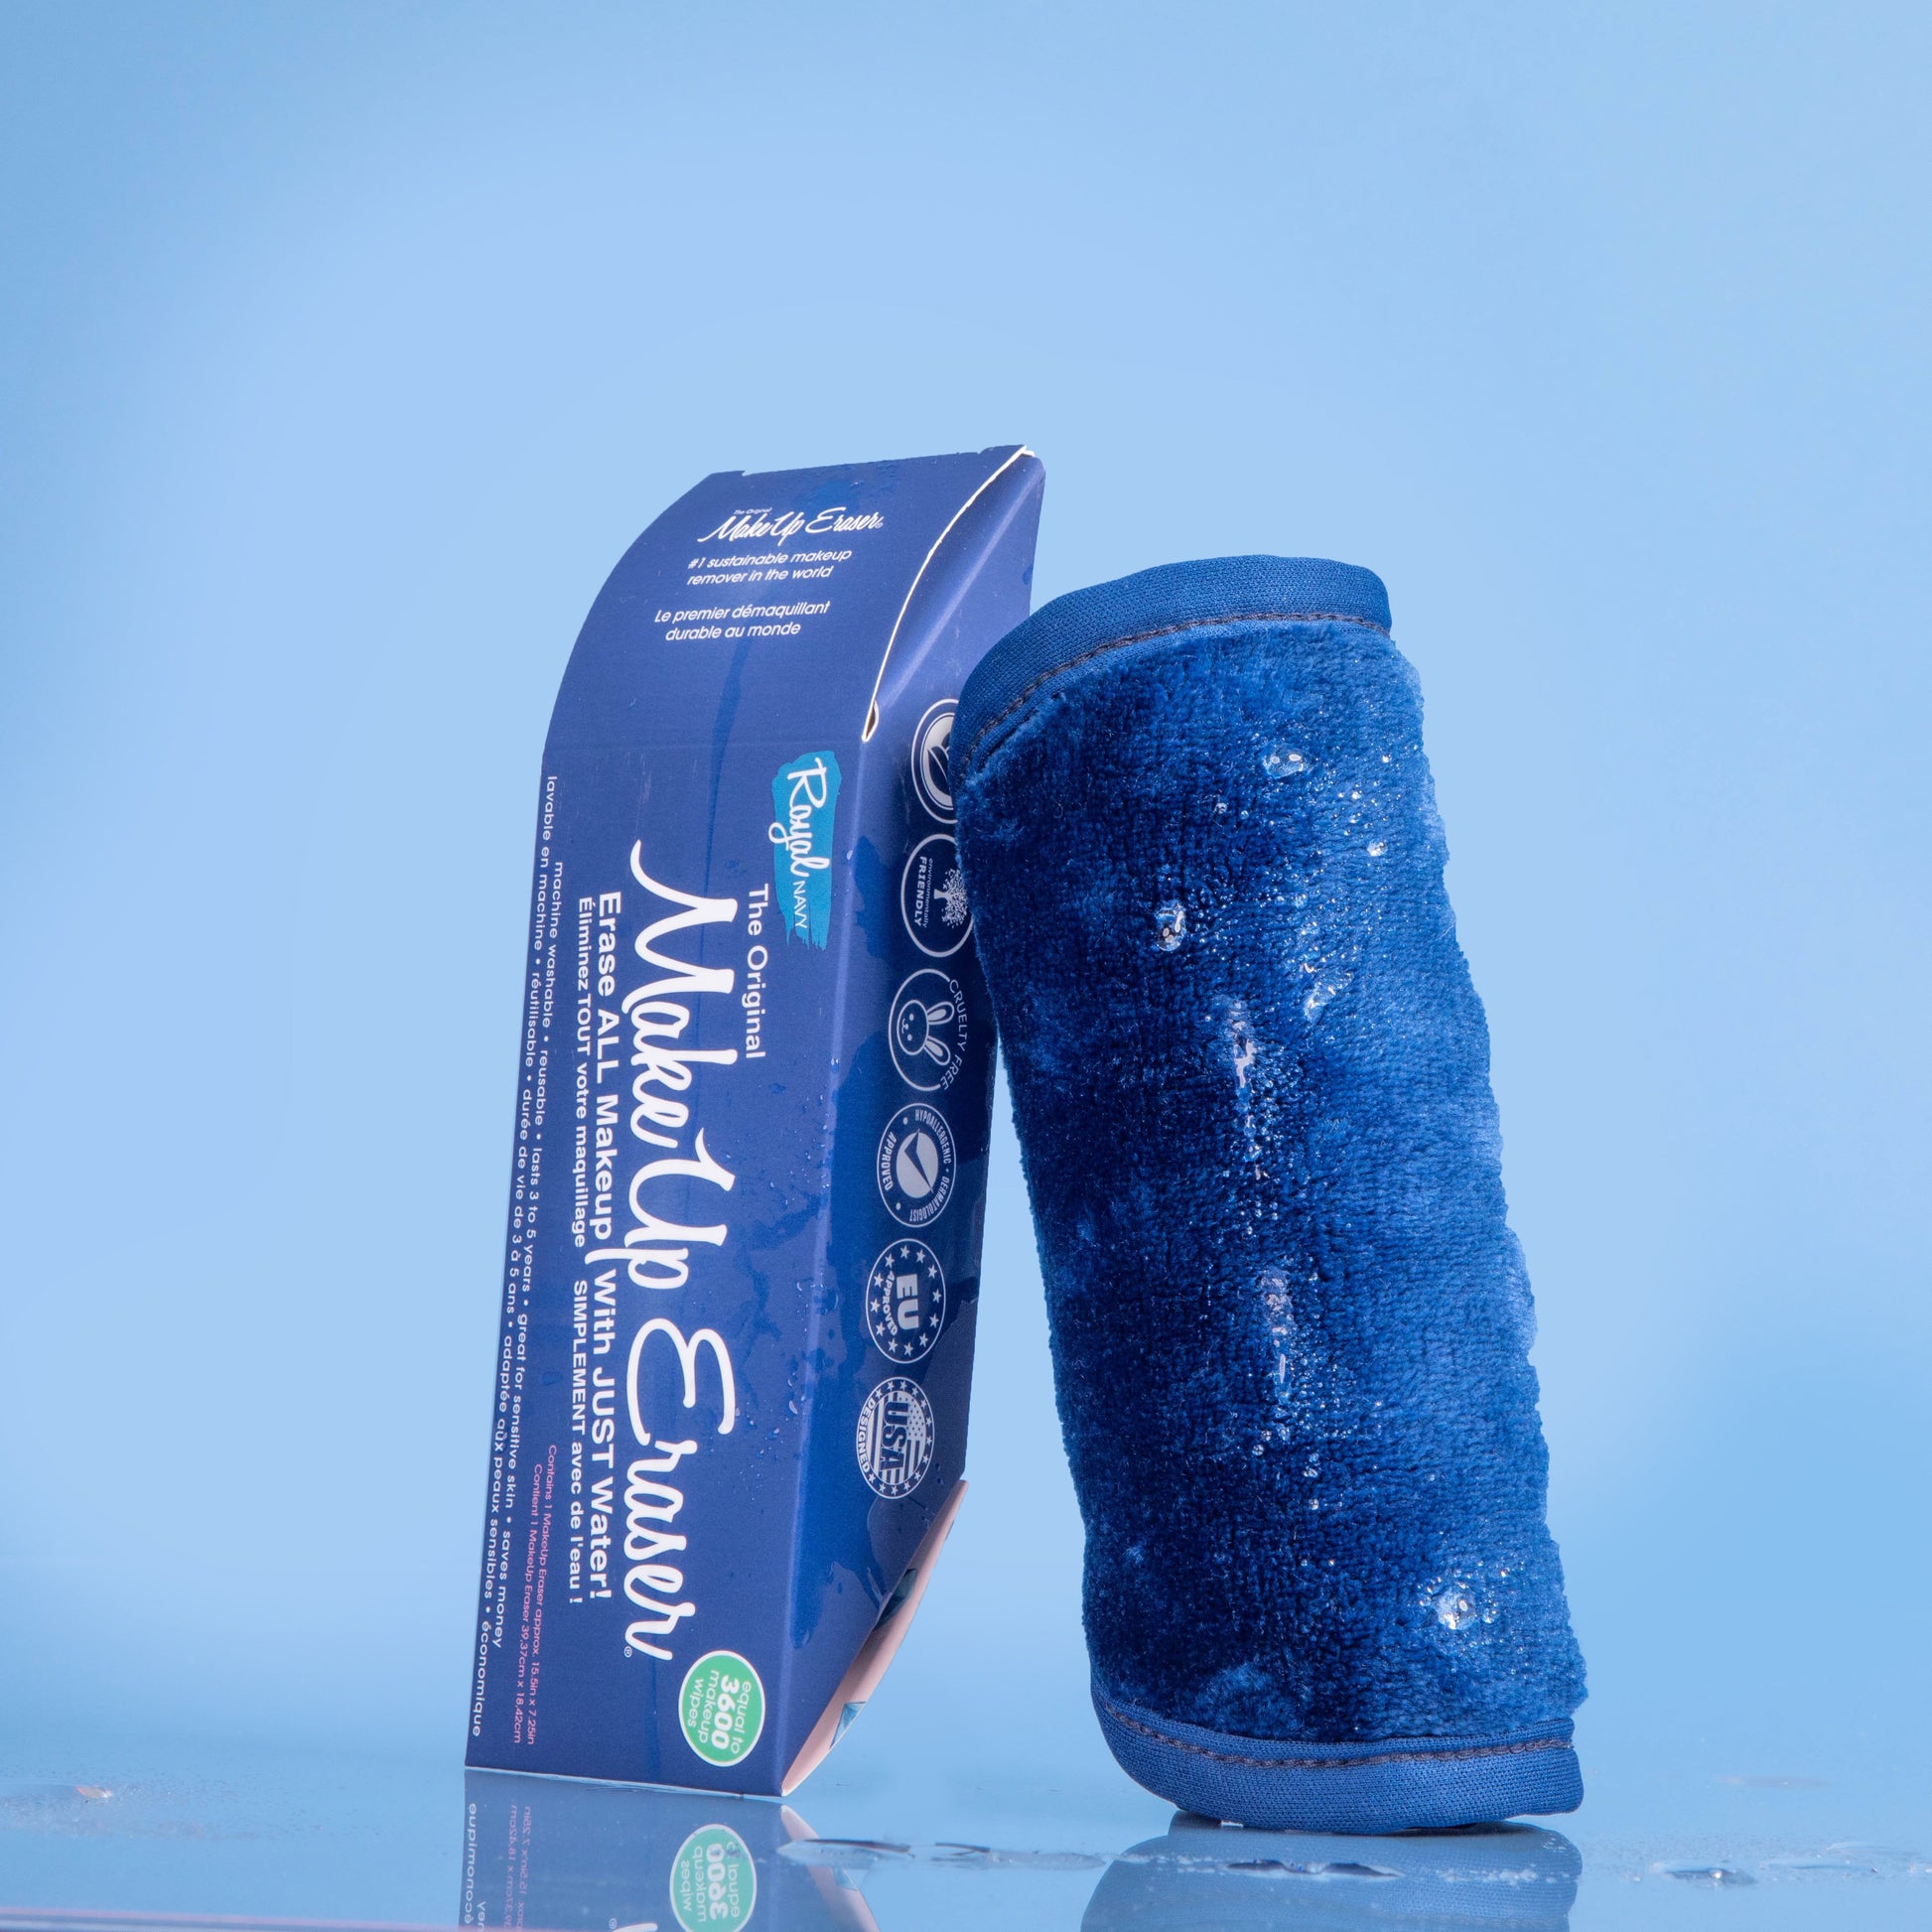 Rolled up Royal Navy MakeUp Eraser next to packaging surrounded by waterdrops.